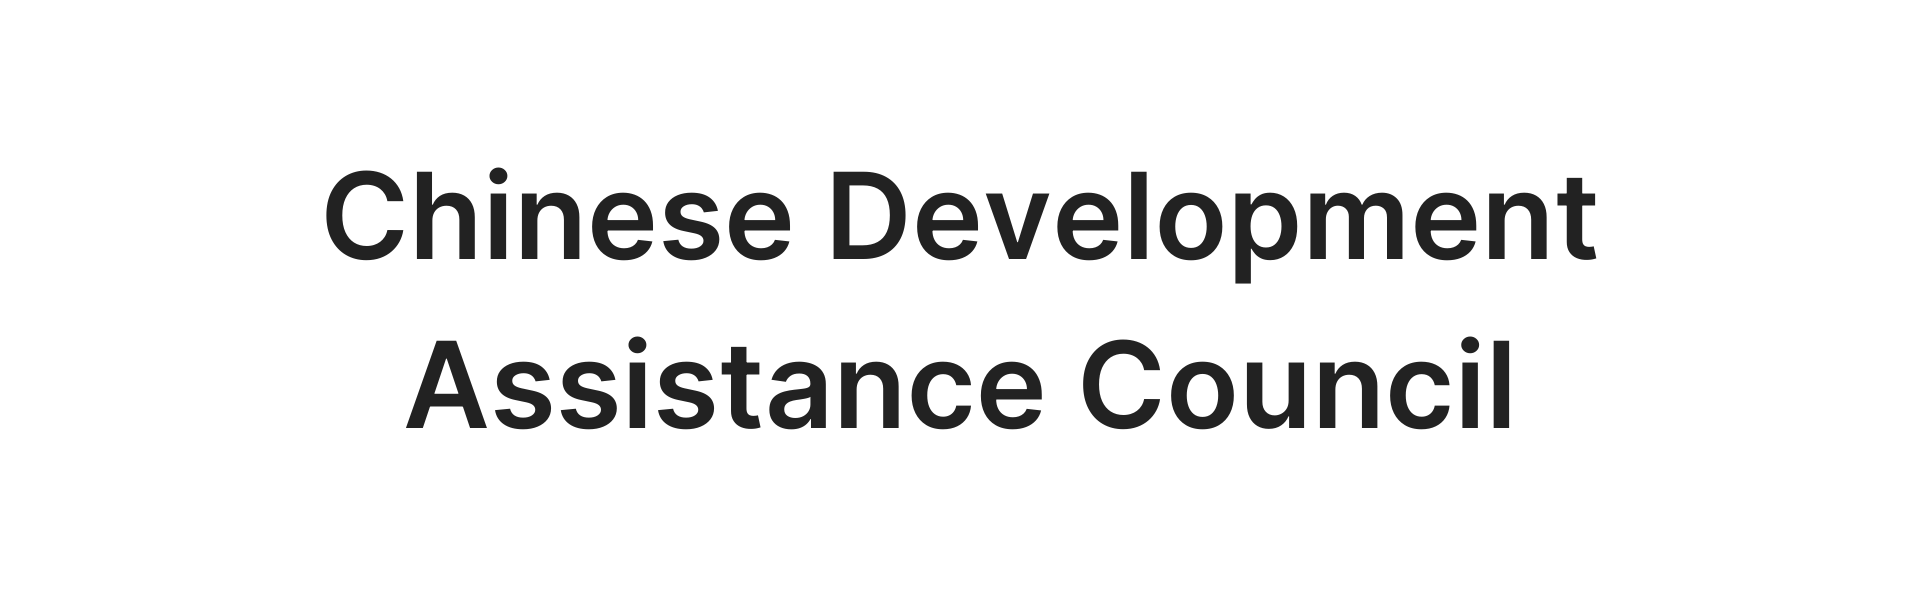 Chinese Development Assistance Council